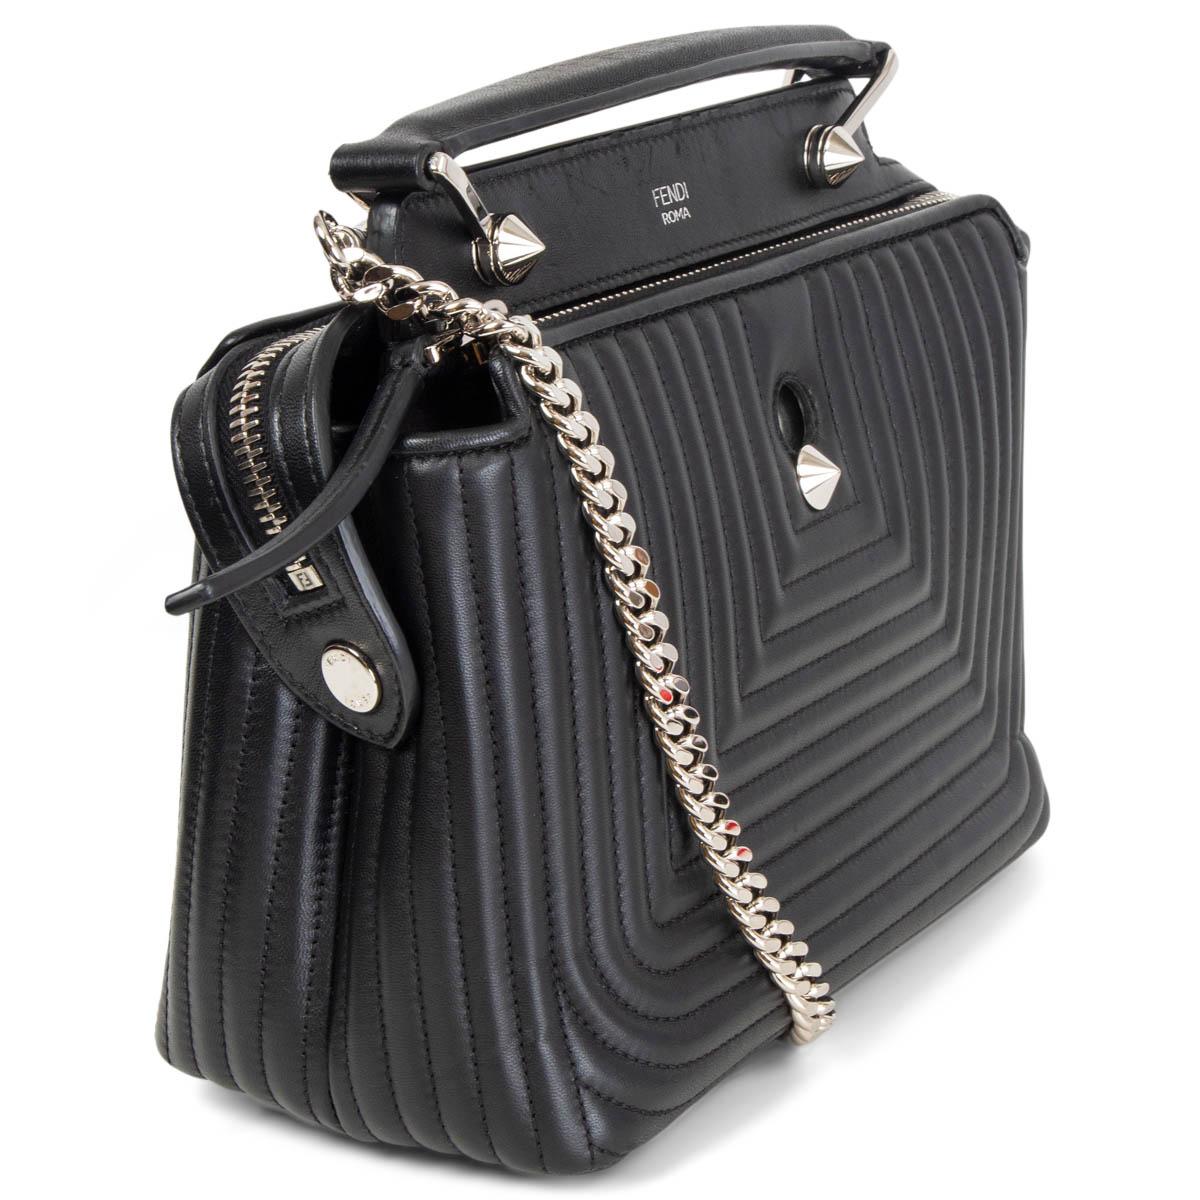 100% authentic Fendi Small Dotcom Click Shoulder Bag in soft black quilted lambskin leather and silver-tone hardware. This chic bag has two compartments and both sections have a zip closure and this particular bag comes with a black leather